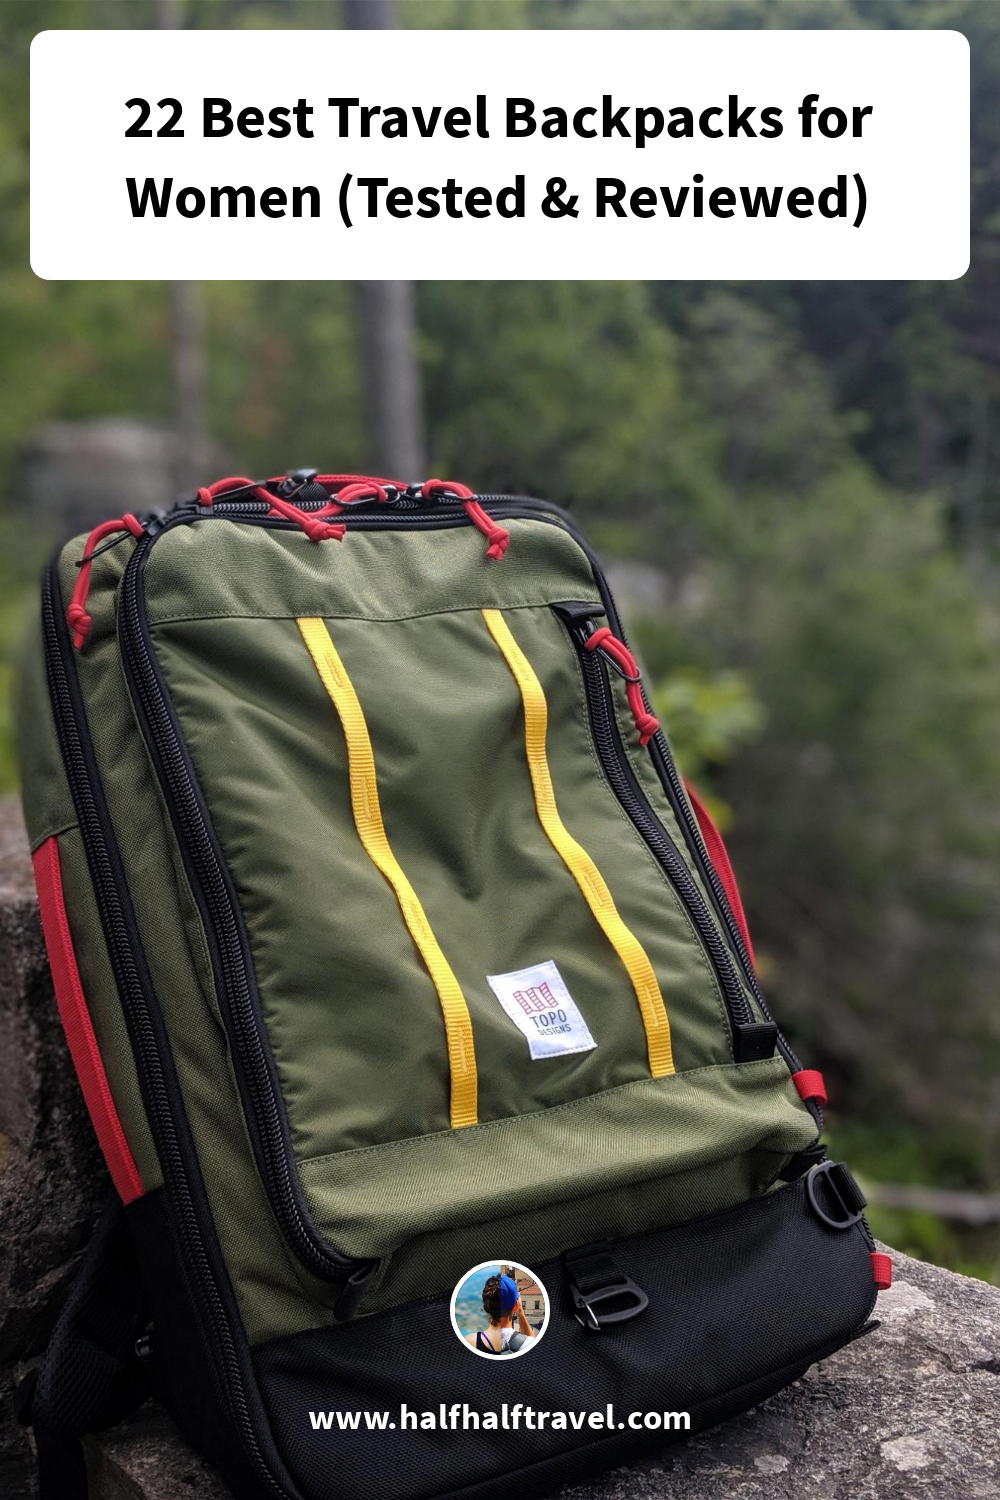 Pinterest image from the '22 Best Travel Backpacks for Women (Tested & Reviewed)' article on Half Half Travel